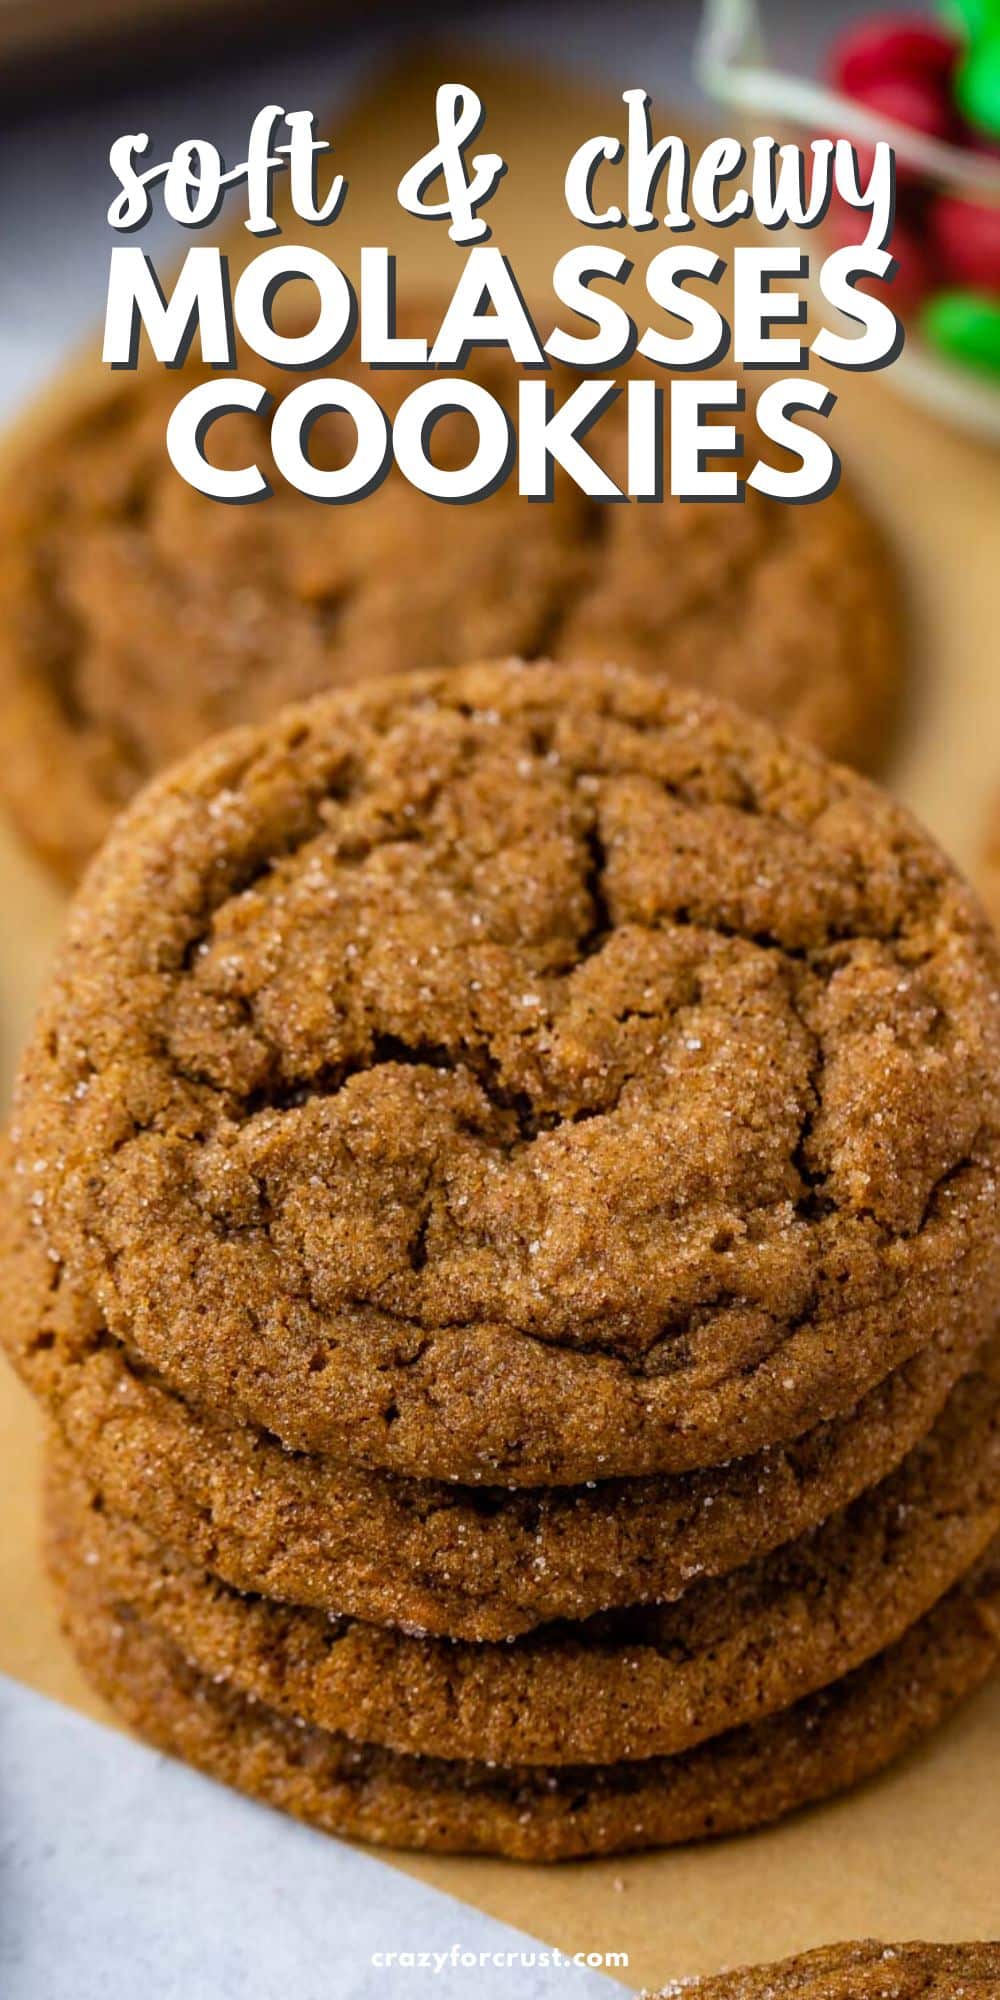 stack of 4 molasses cookies with words on photo